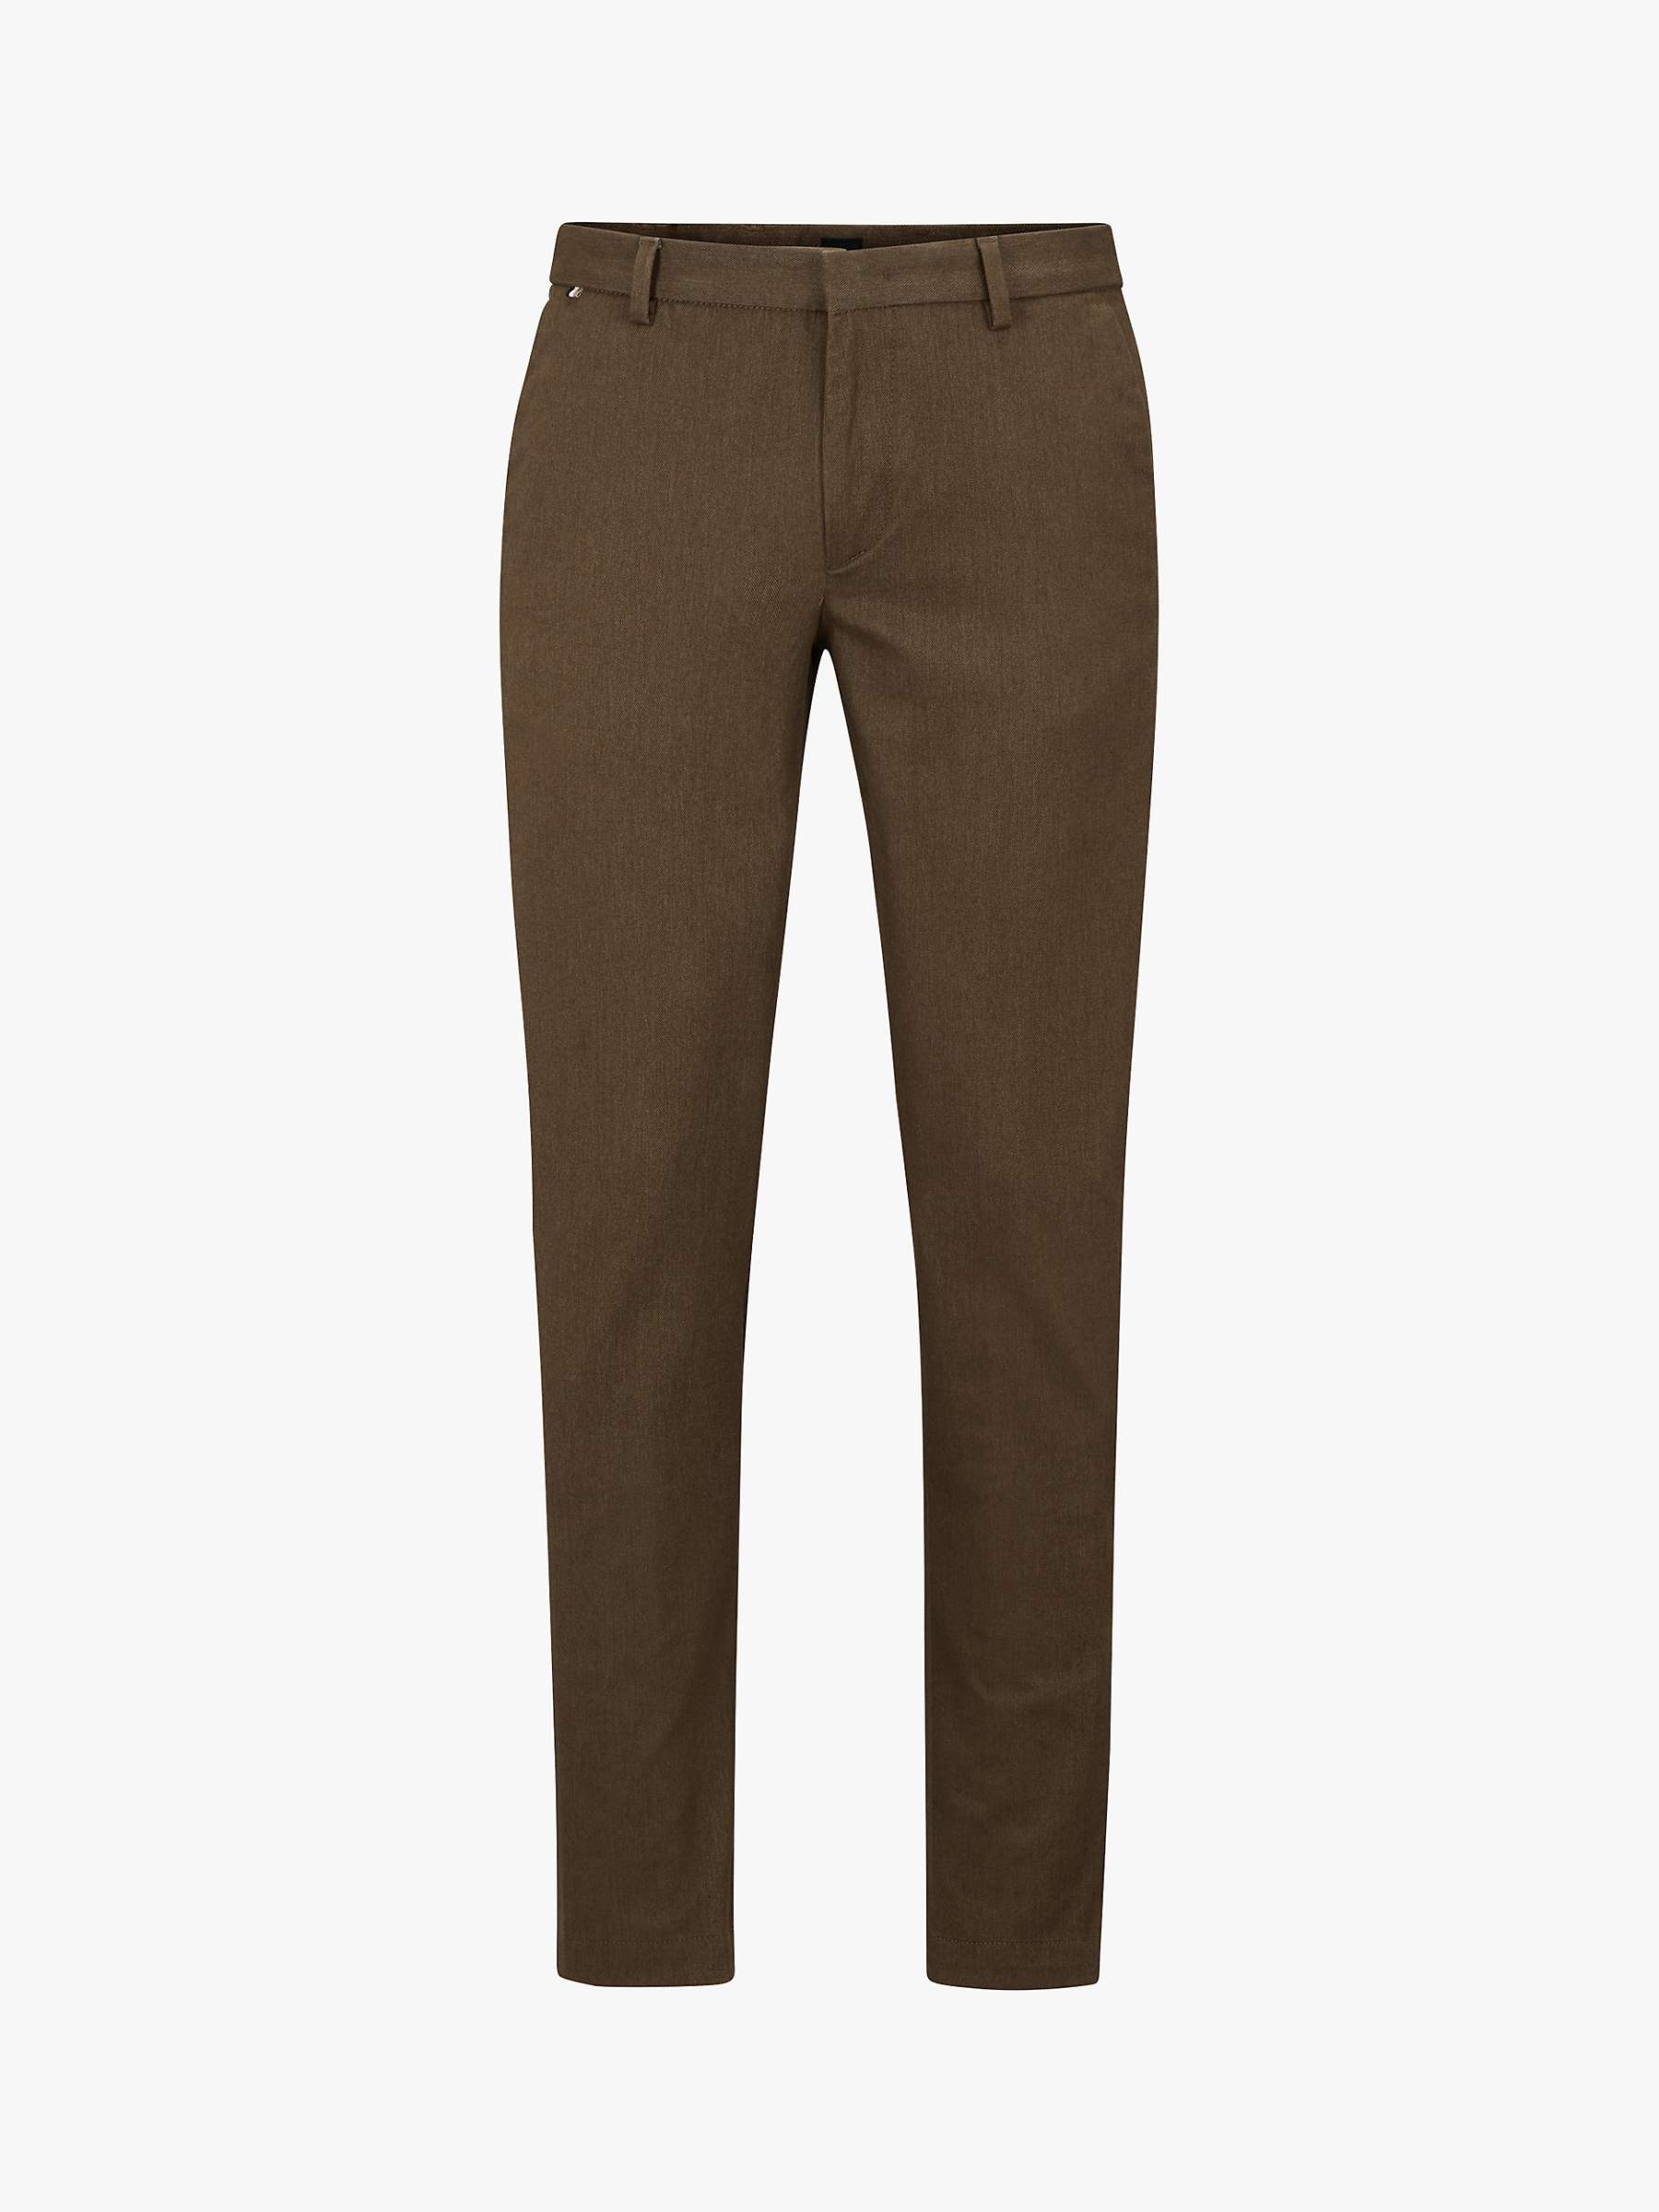 Buy BOSS Kaito Brushed Cotton Slim Fit Trousers, Open Green Online at johnlewis.com